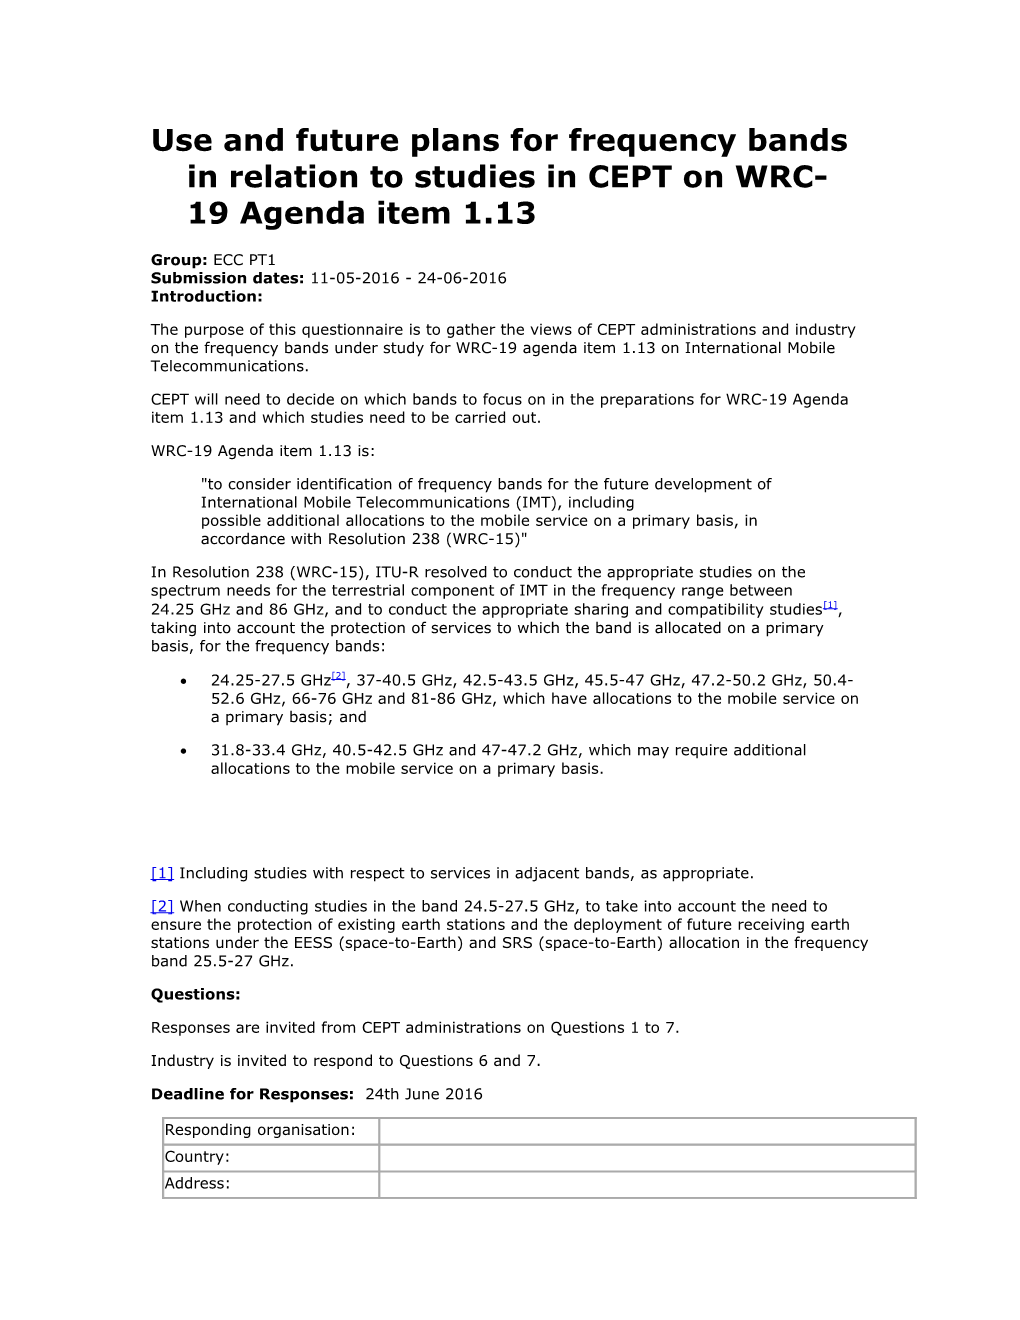 Use and Future Plans for Frequency Bands in Relation to Studies in CEPT on WRC-19 Agenda